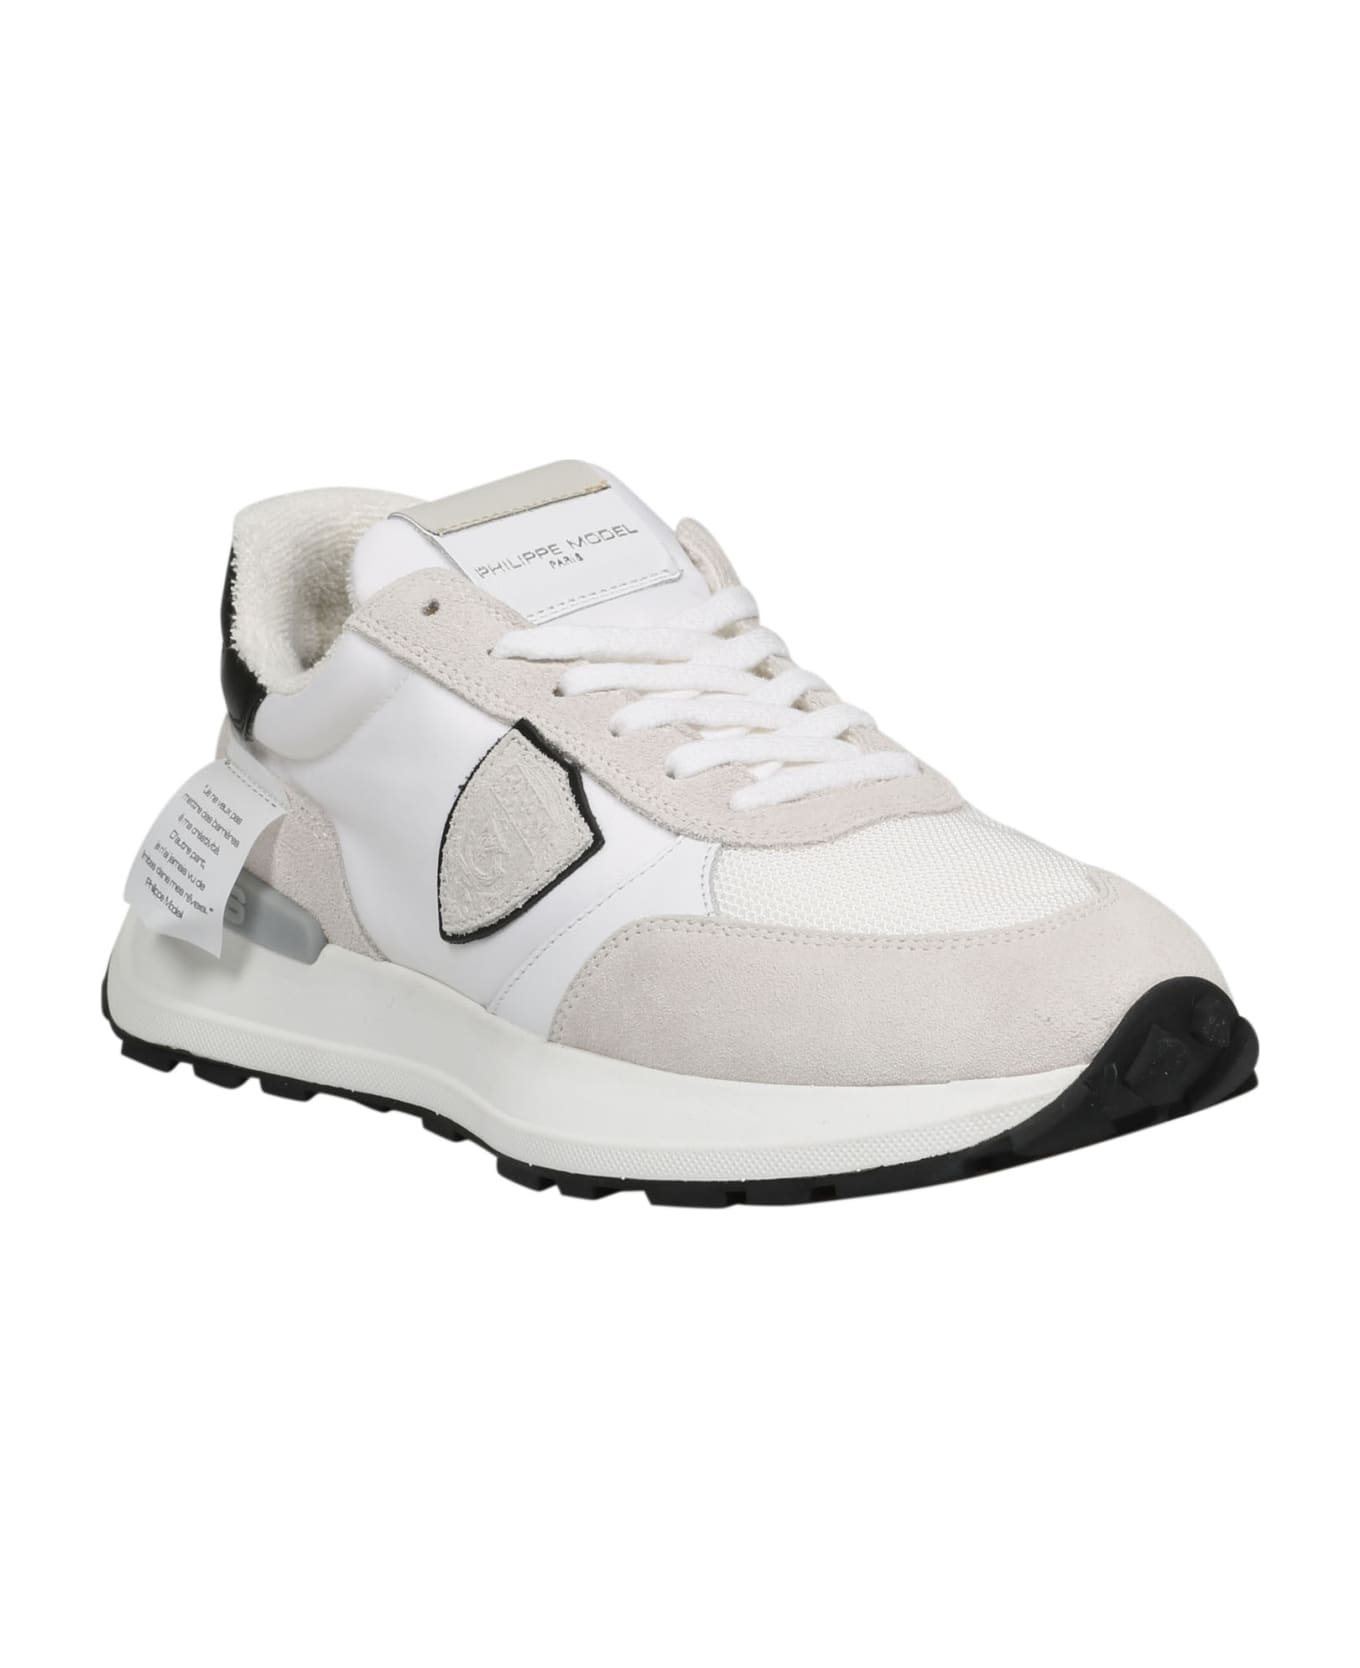 Philippe Model Antibes Low Sneakers - WHITE/GREY